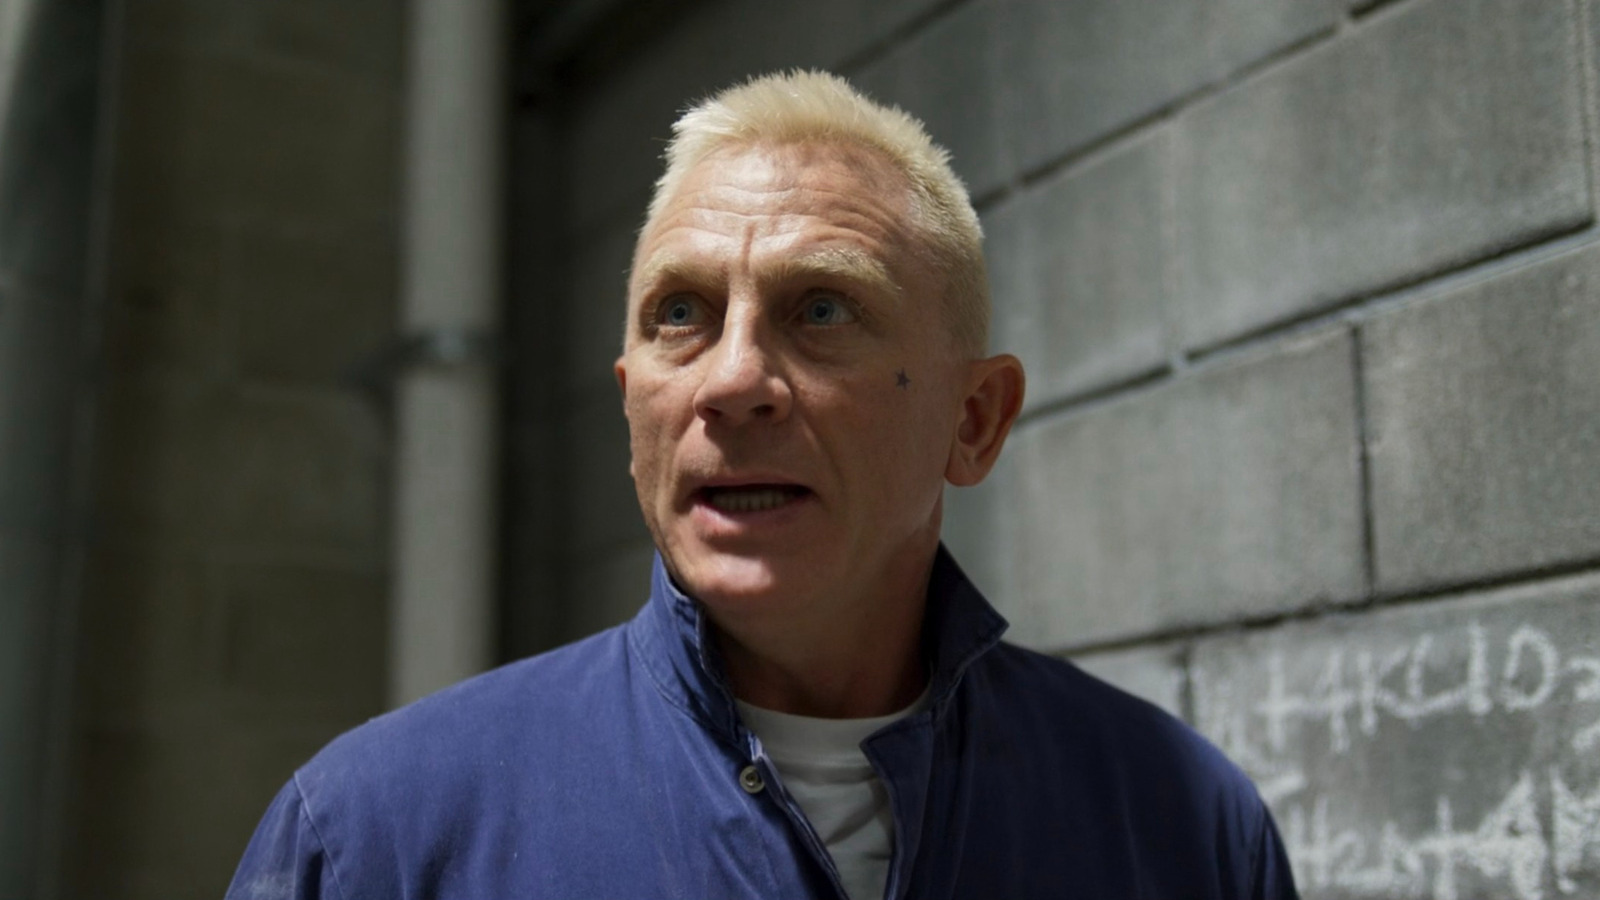 We Came Close To A Logan Lucky Spin-Off With Daniel Craig